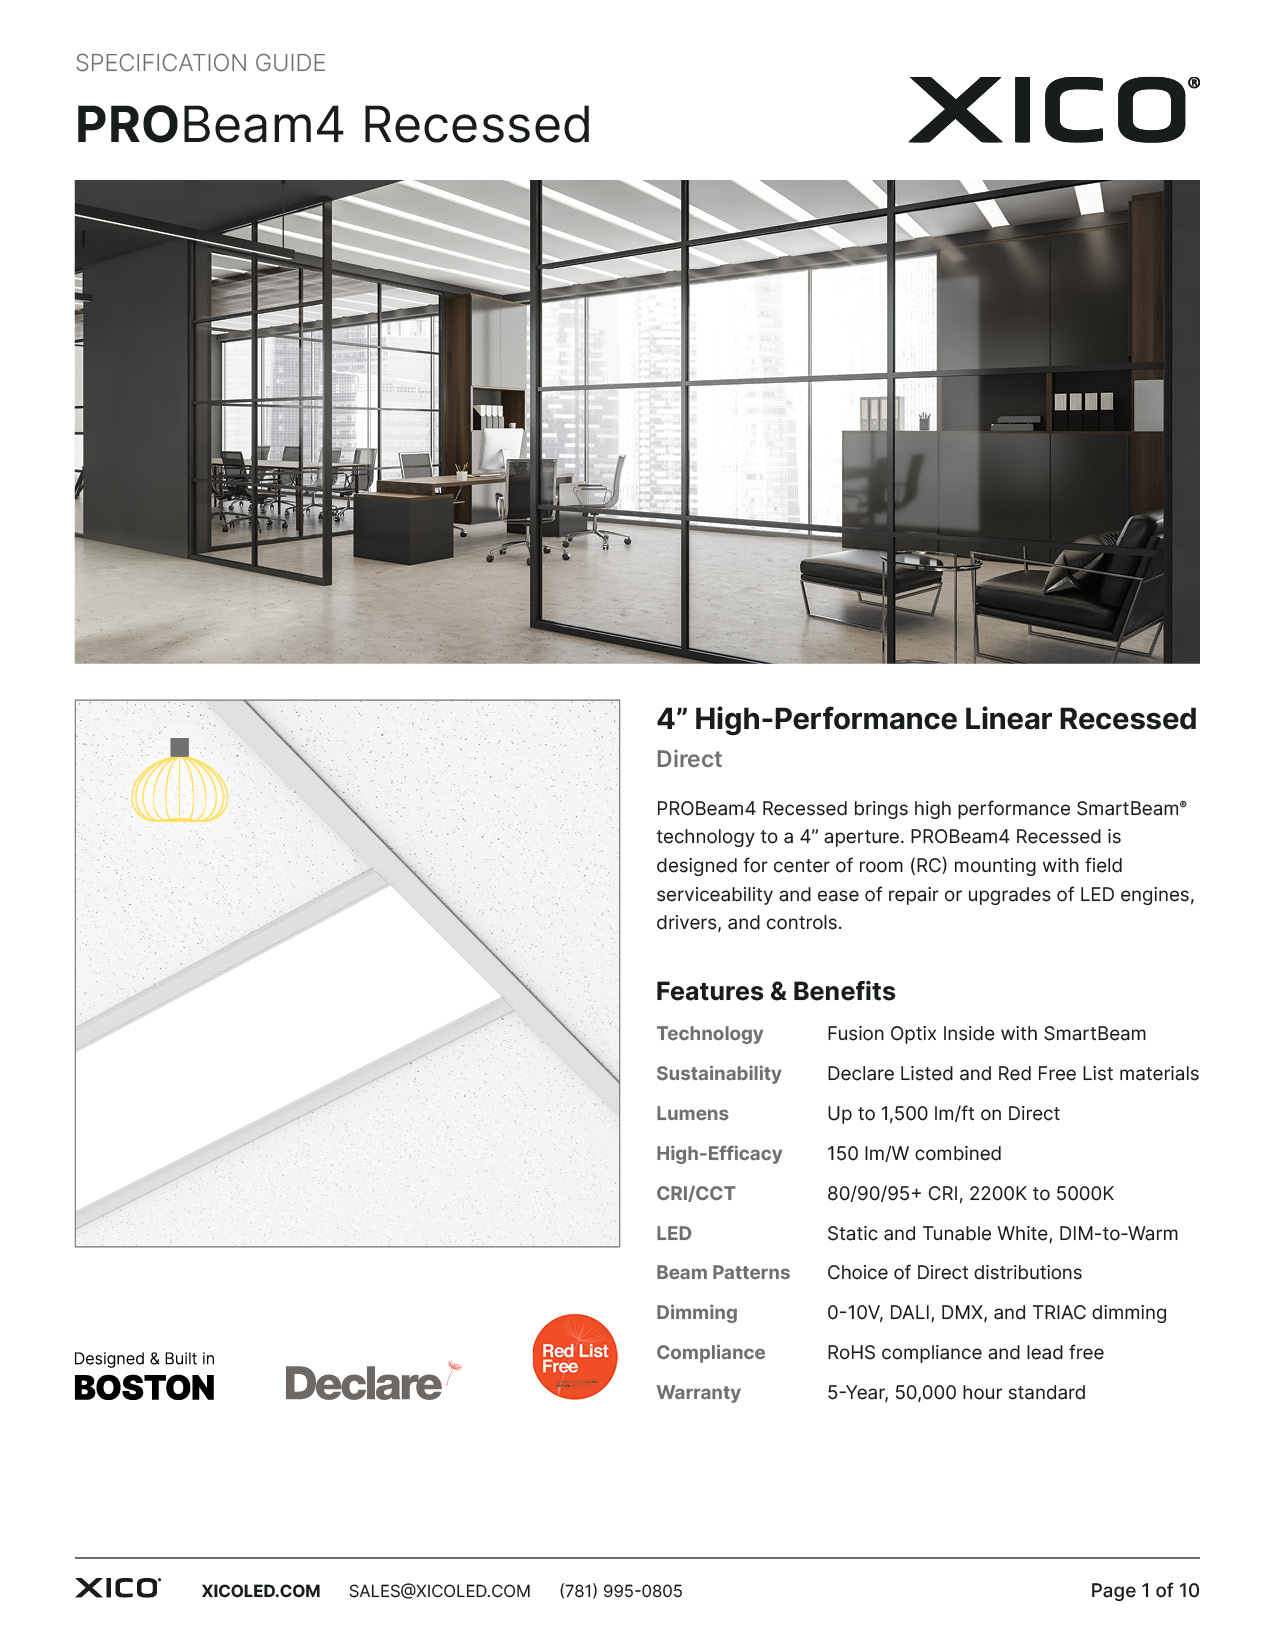 PROBeam4 Recessed Specification Guide